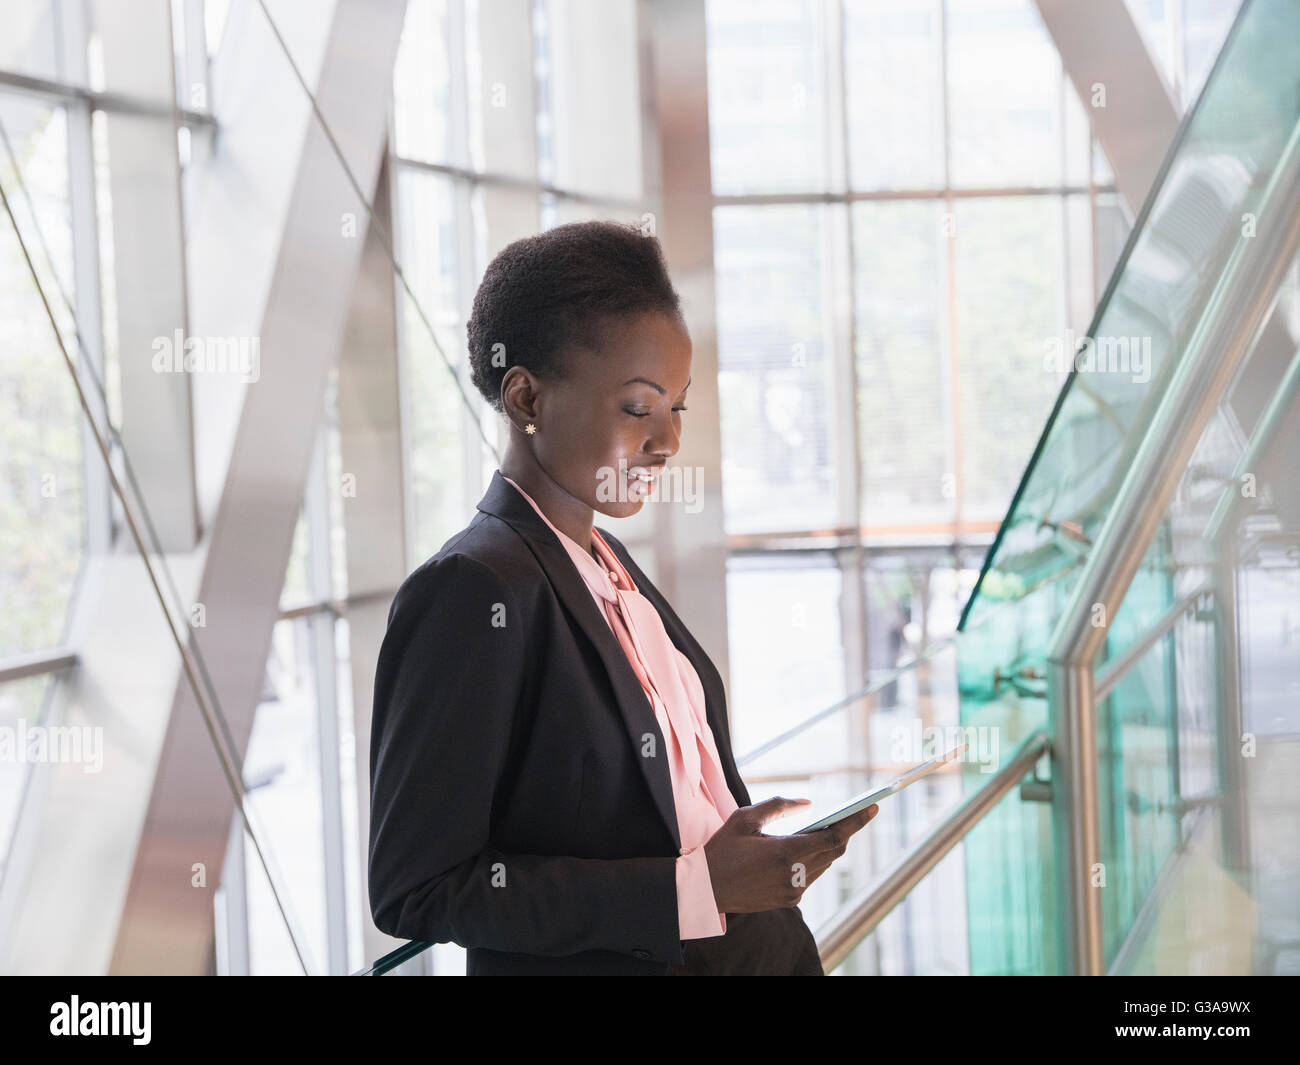 Corporate businesswoman using digital tablet in modern office lobby Stock Photo